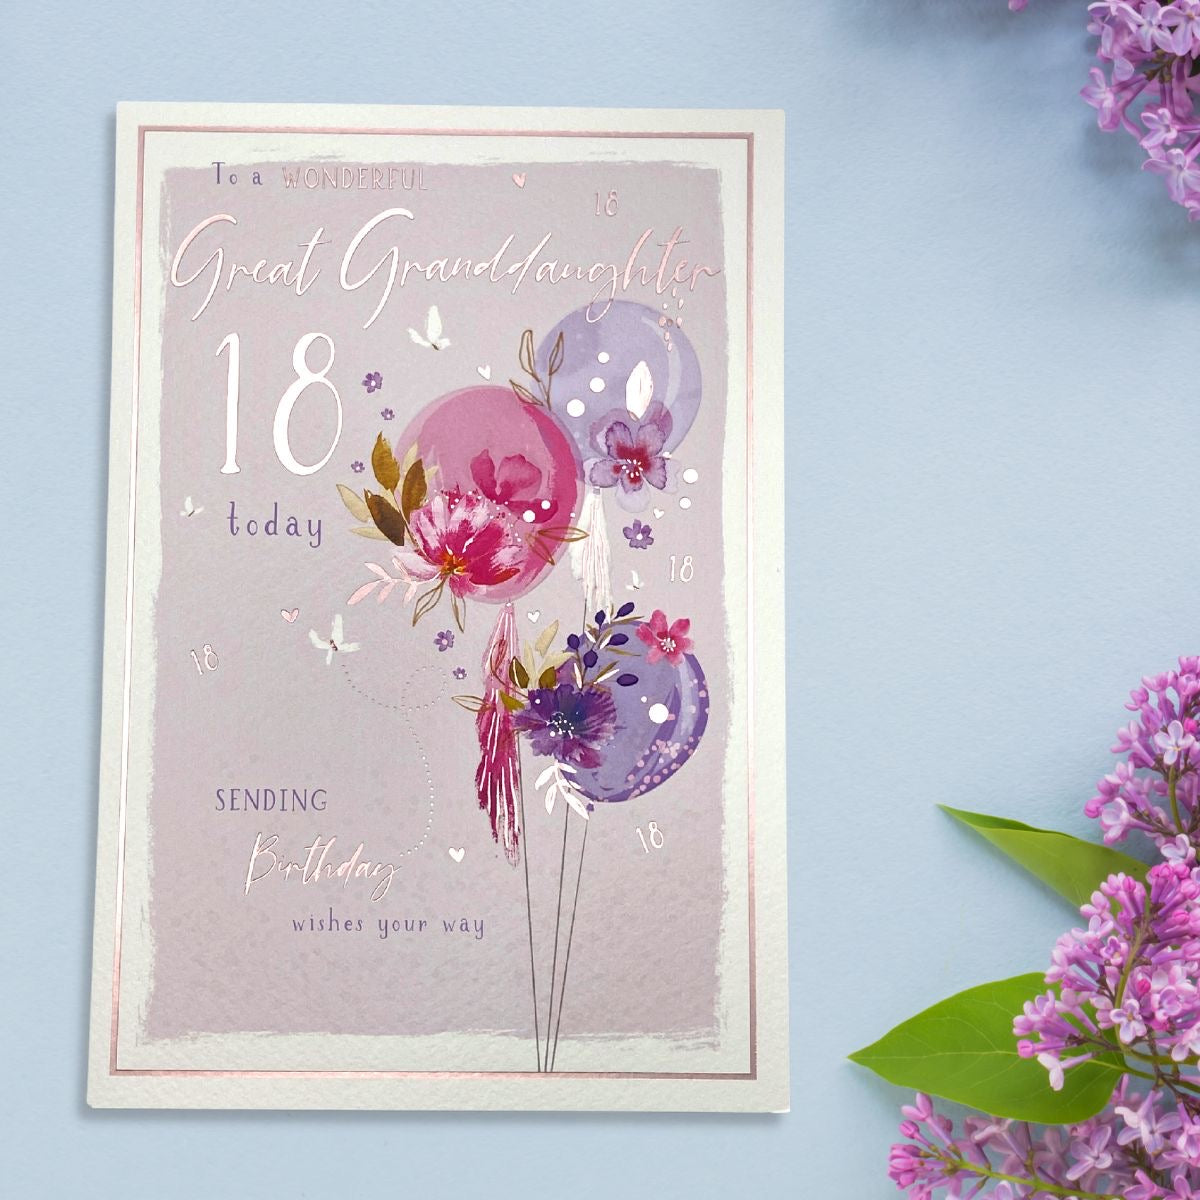 Great Granddaughter 18th Birthday Card Displayed In Full